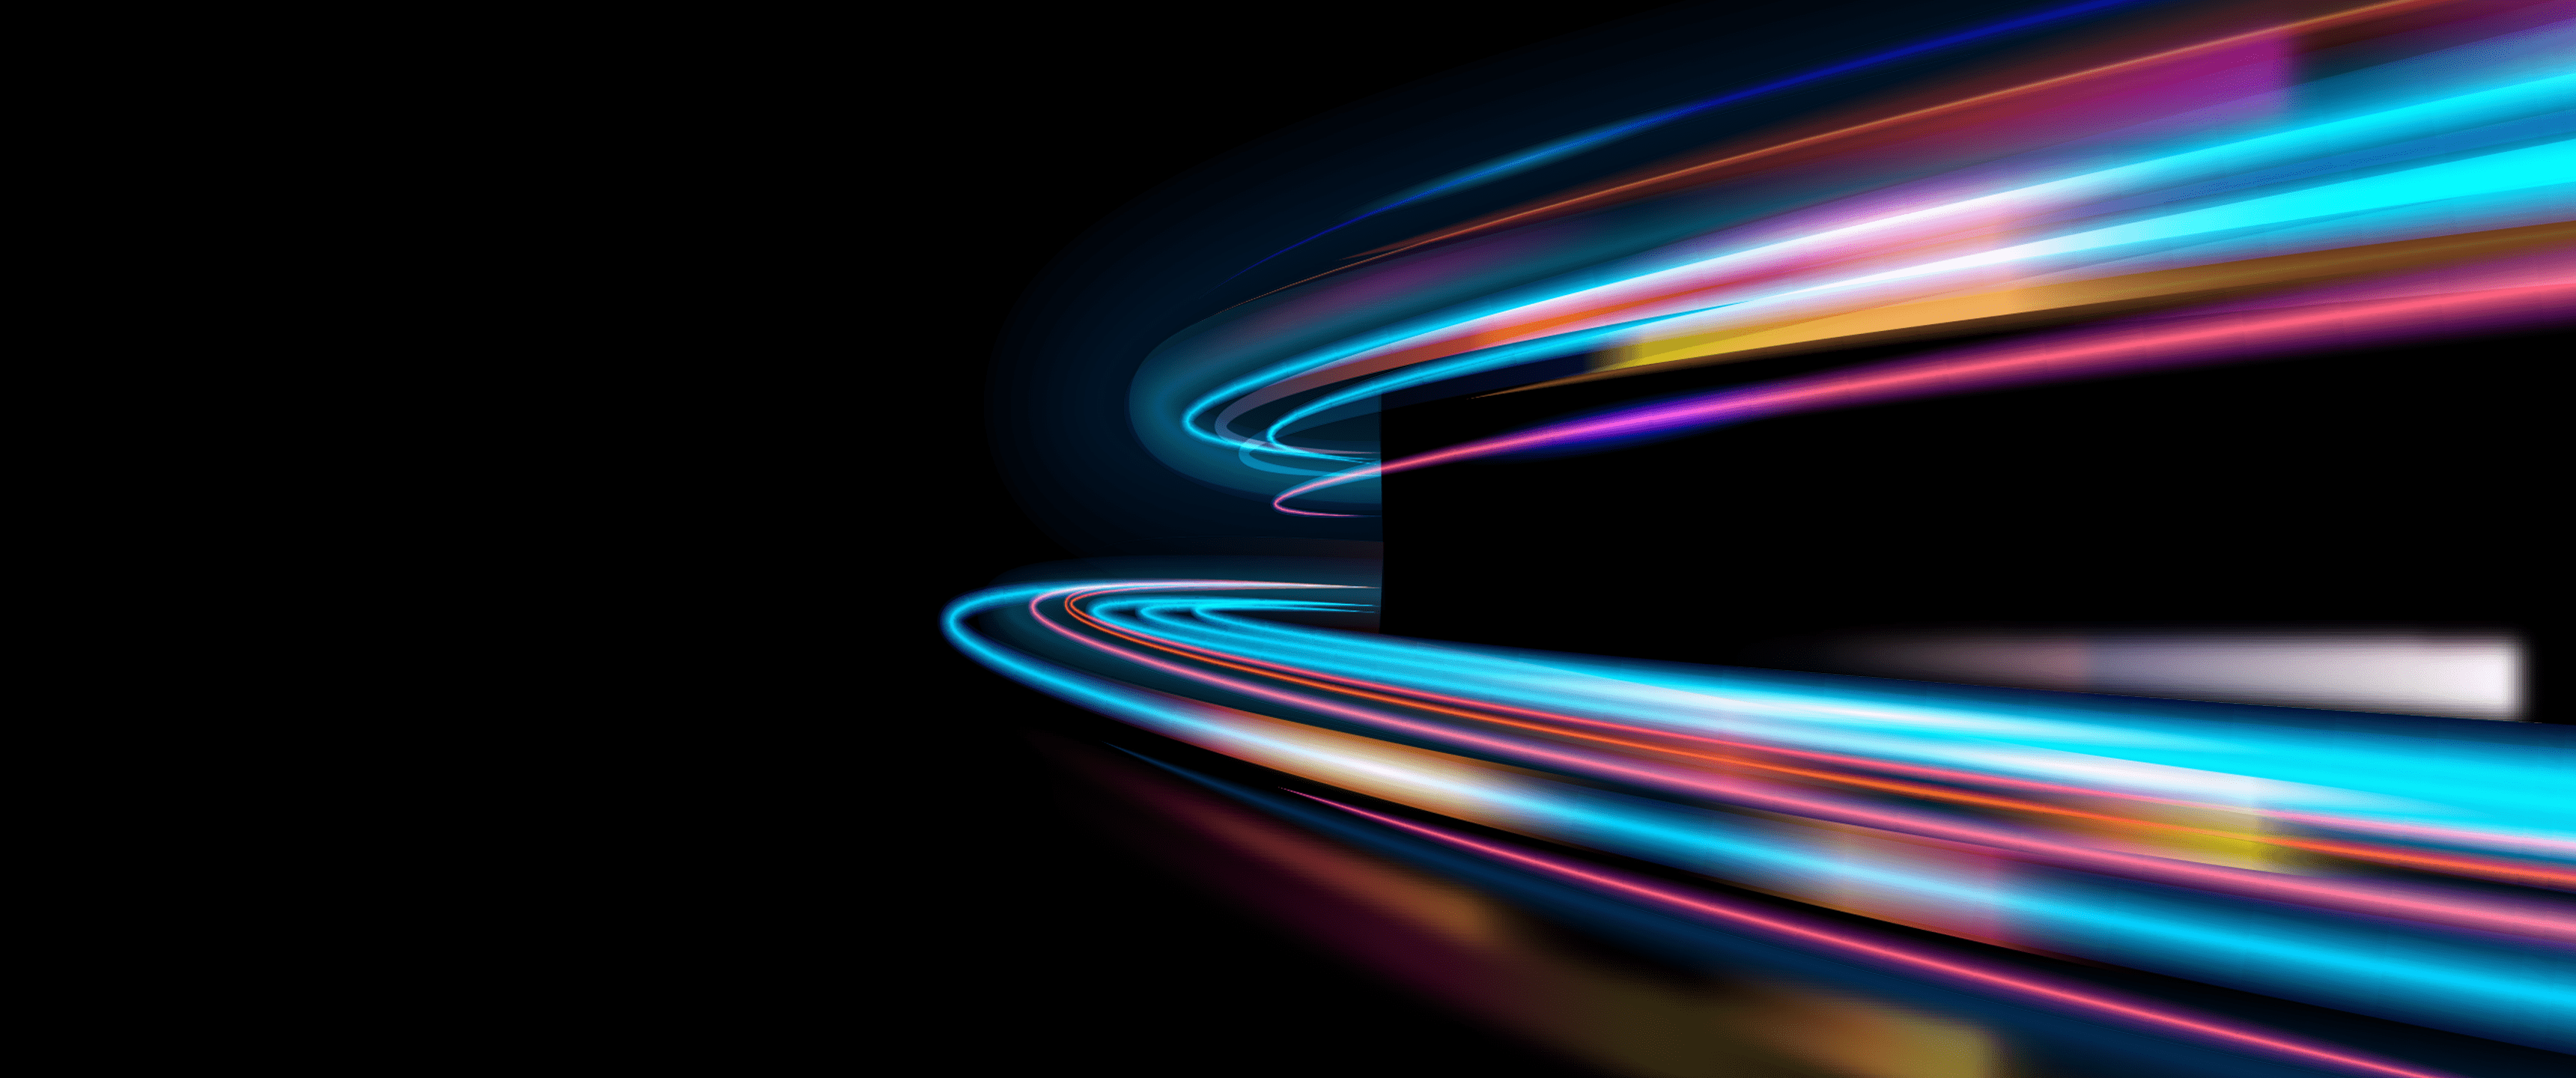 A car's tail lights in a tunnel, creating a sense of speed and motion. - 3440x1440